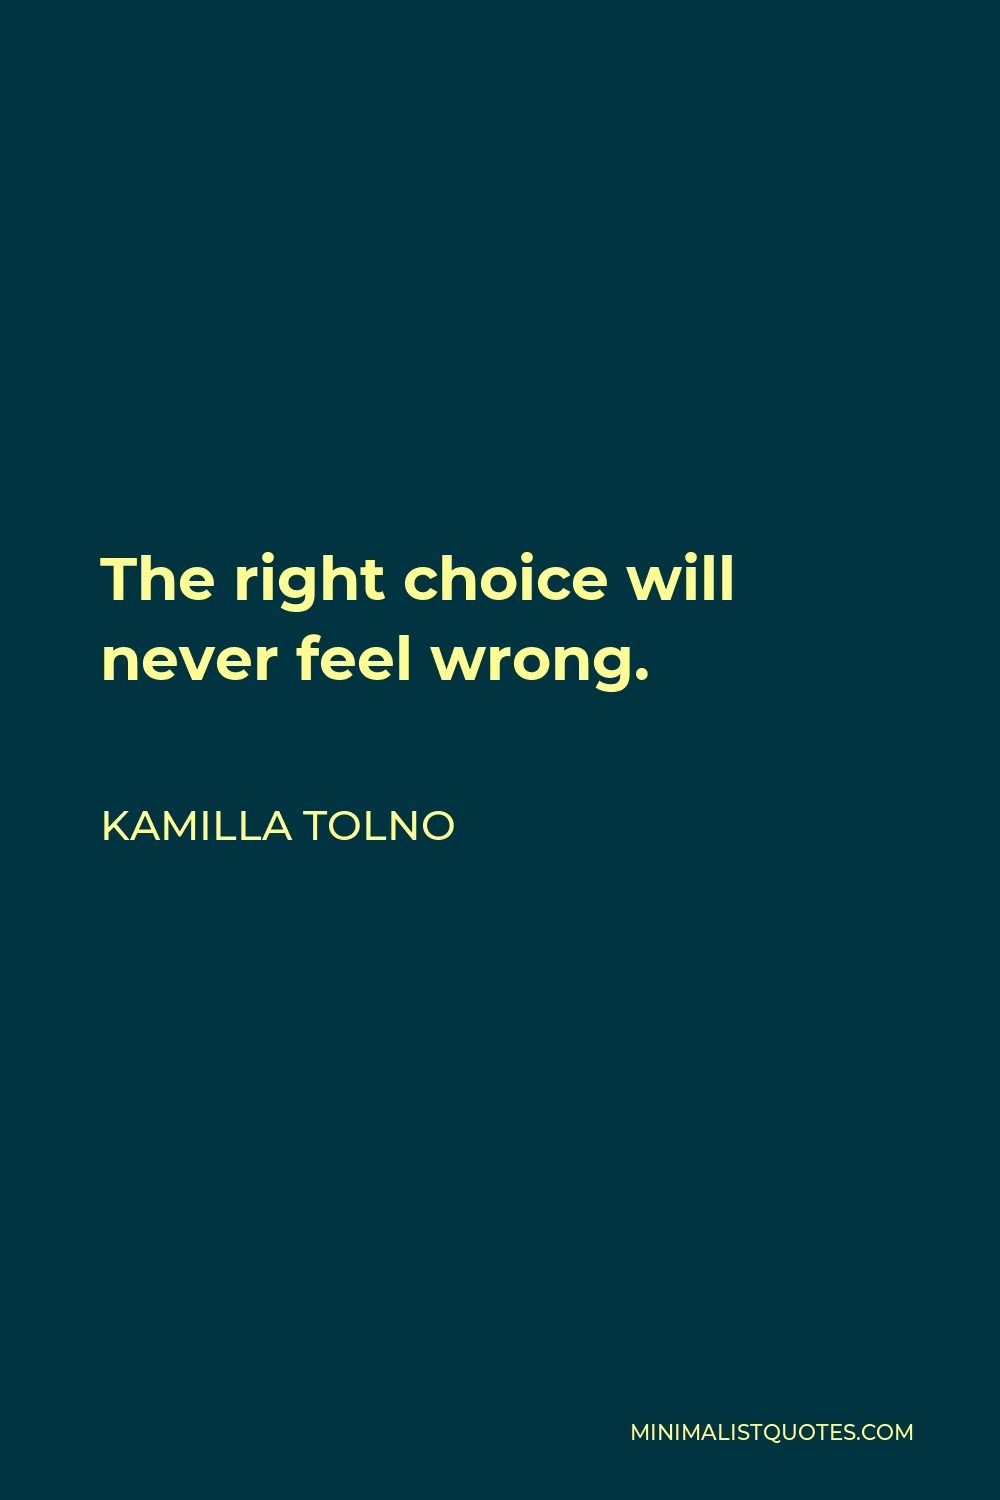 Kamilla Tolno Quote - The right choice will never feel wrong.